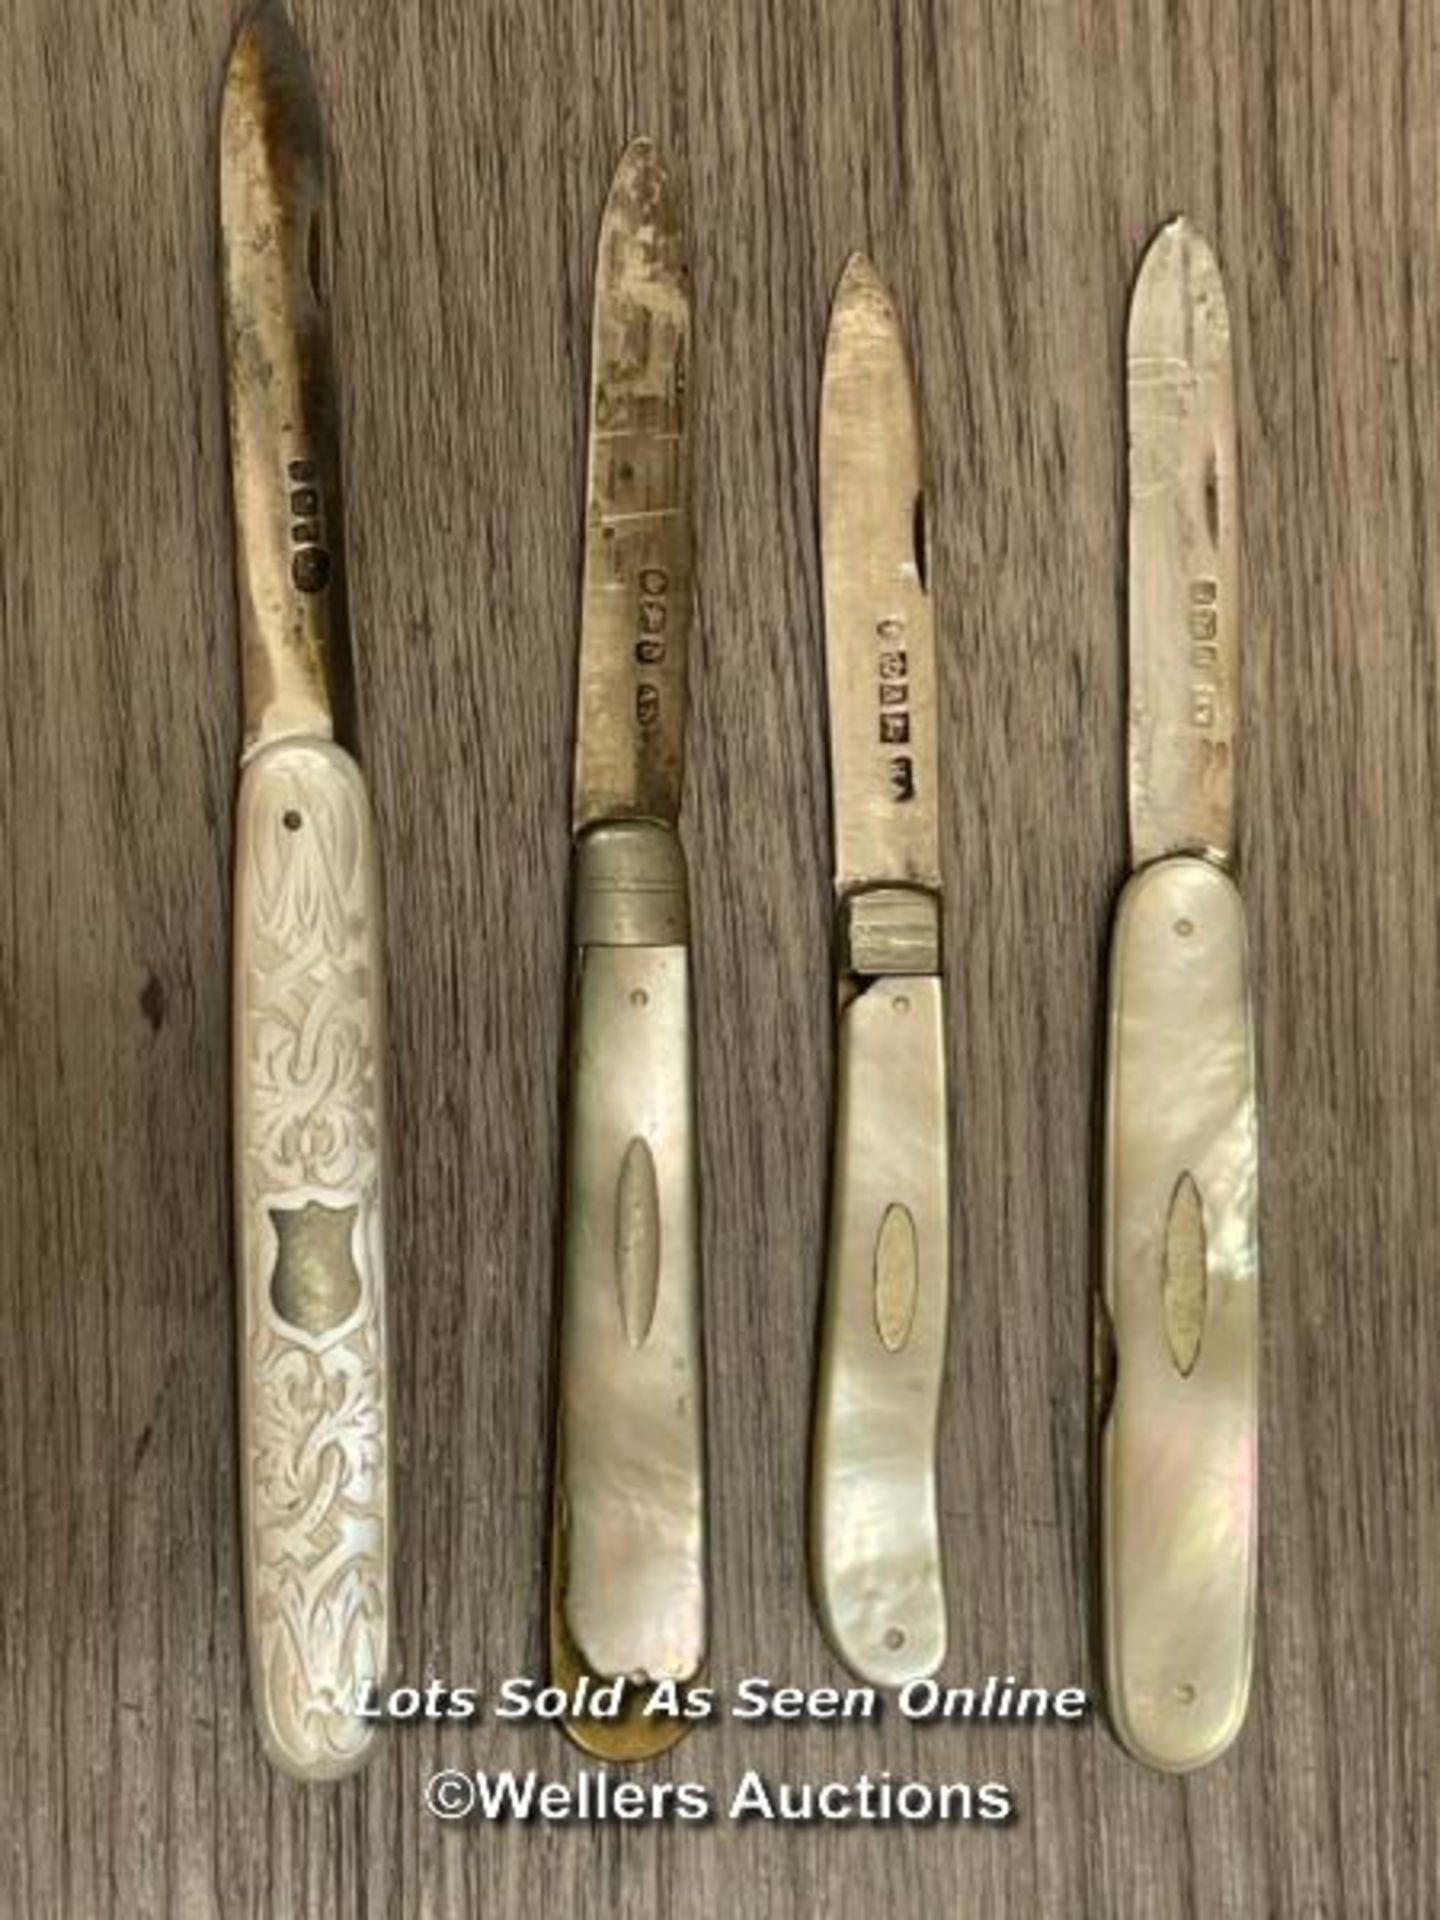 FOUR SILVER POCKET KNIVES WITH MOTHER OF PEARL HANDLES